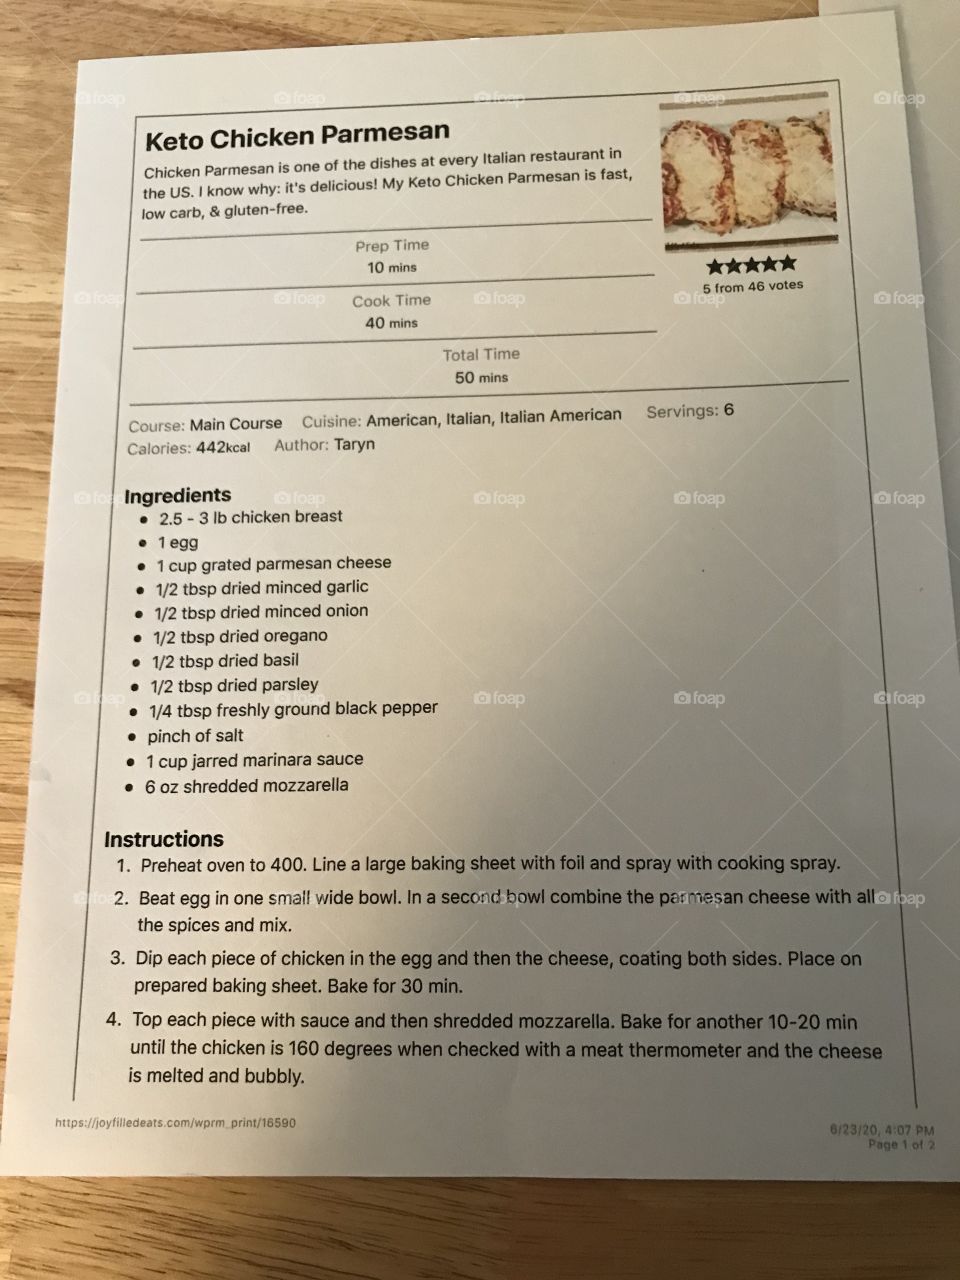 Picture I took of a recipe I used from the internet that I printed out, this is NOT my recipe all credit goes to joy filled eats website